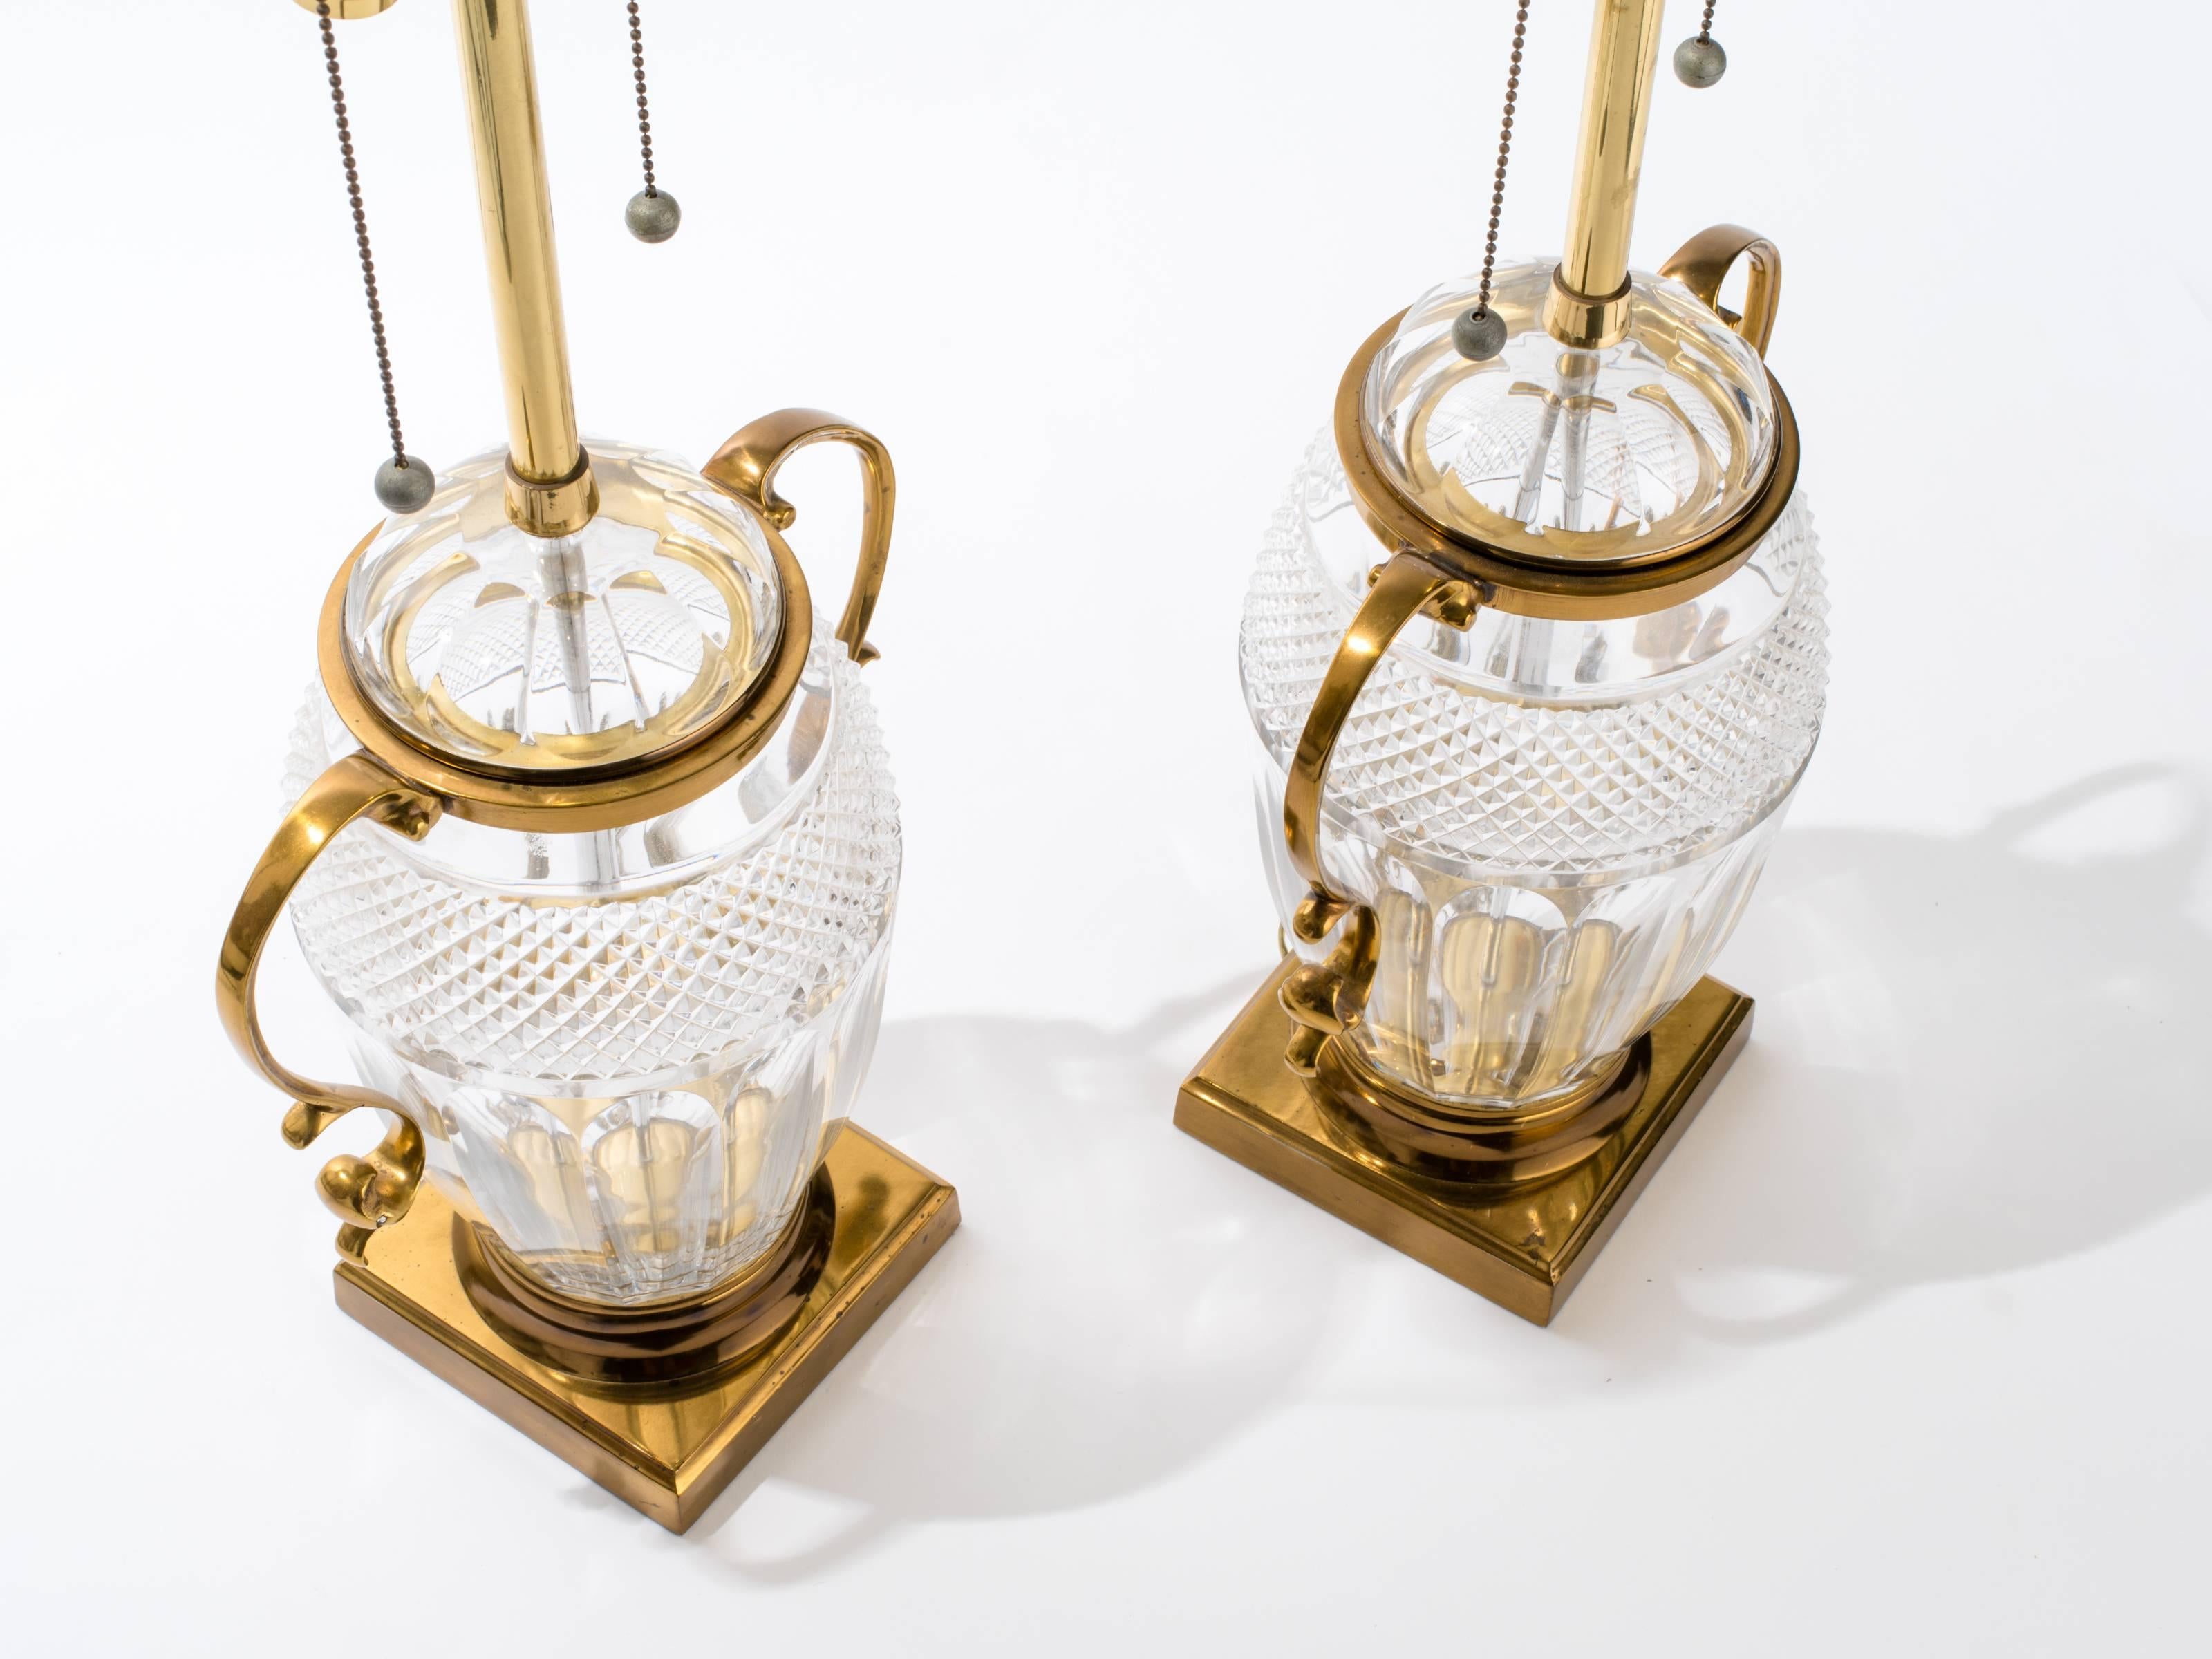 American Pair of Brass and Cut-Glass Urn Table Lamps